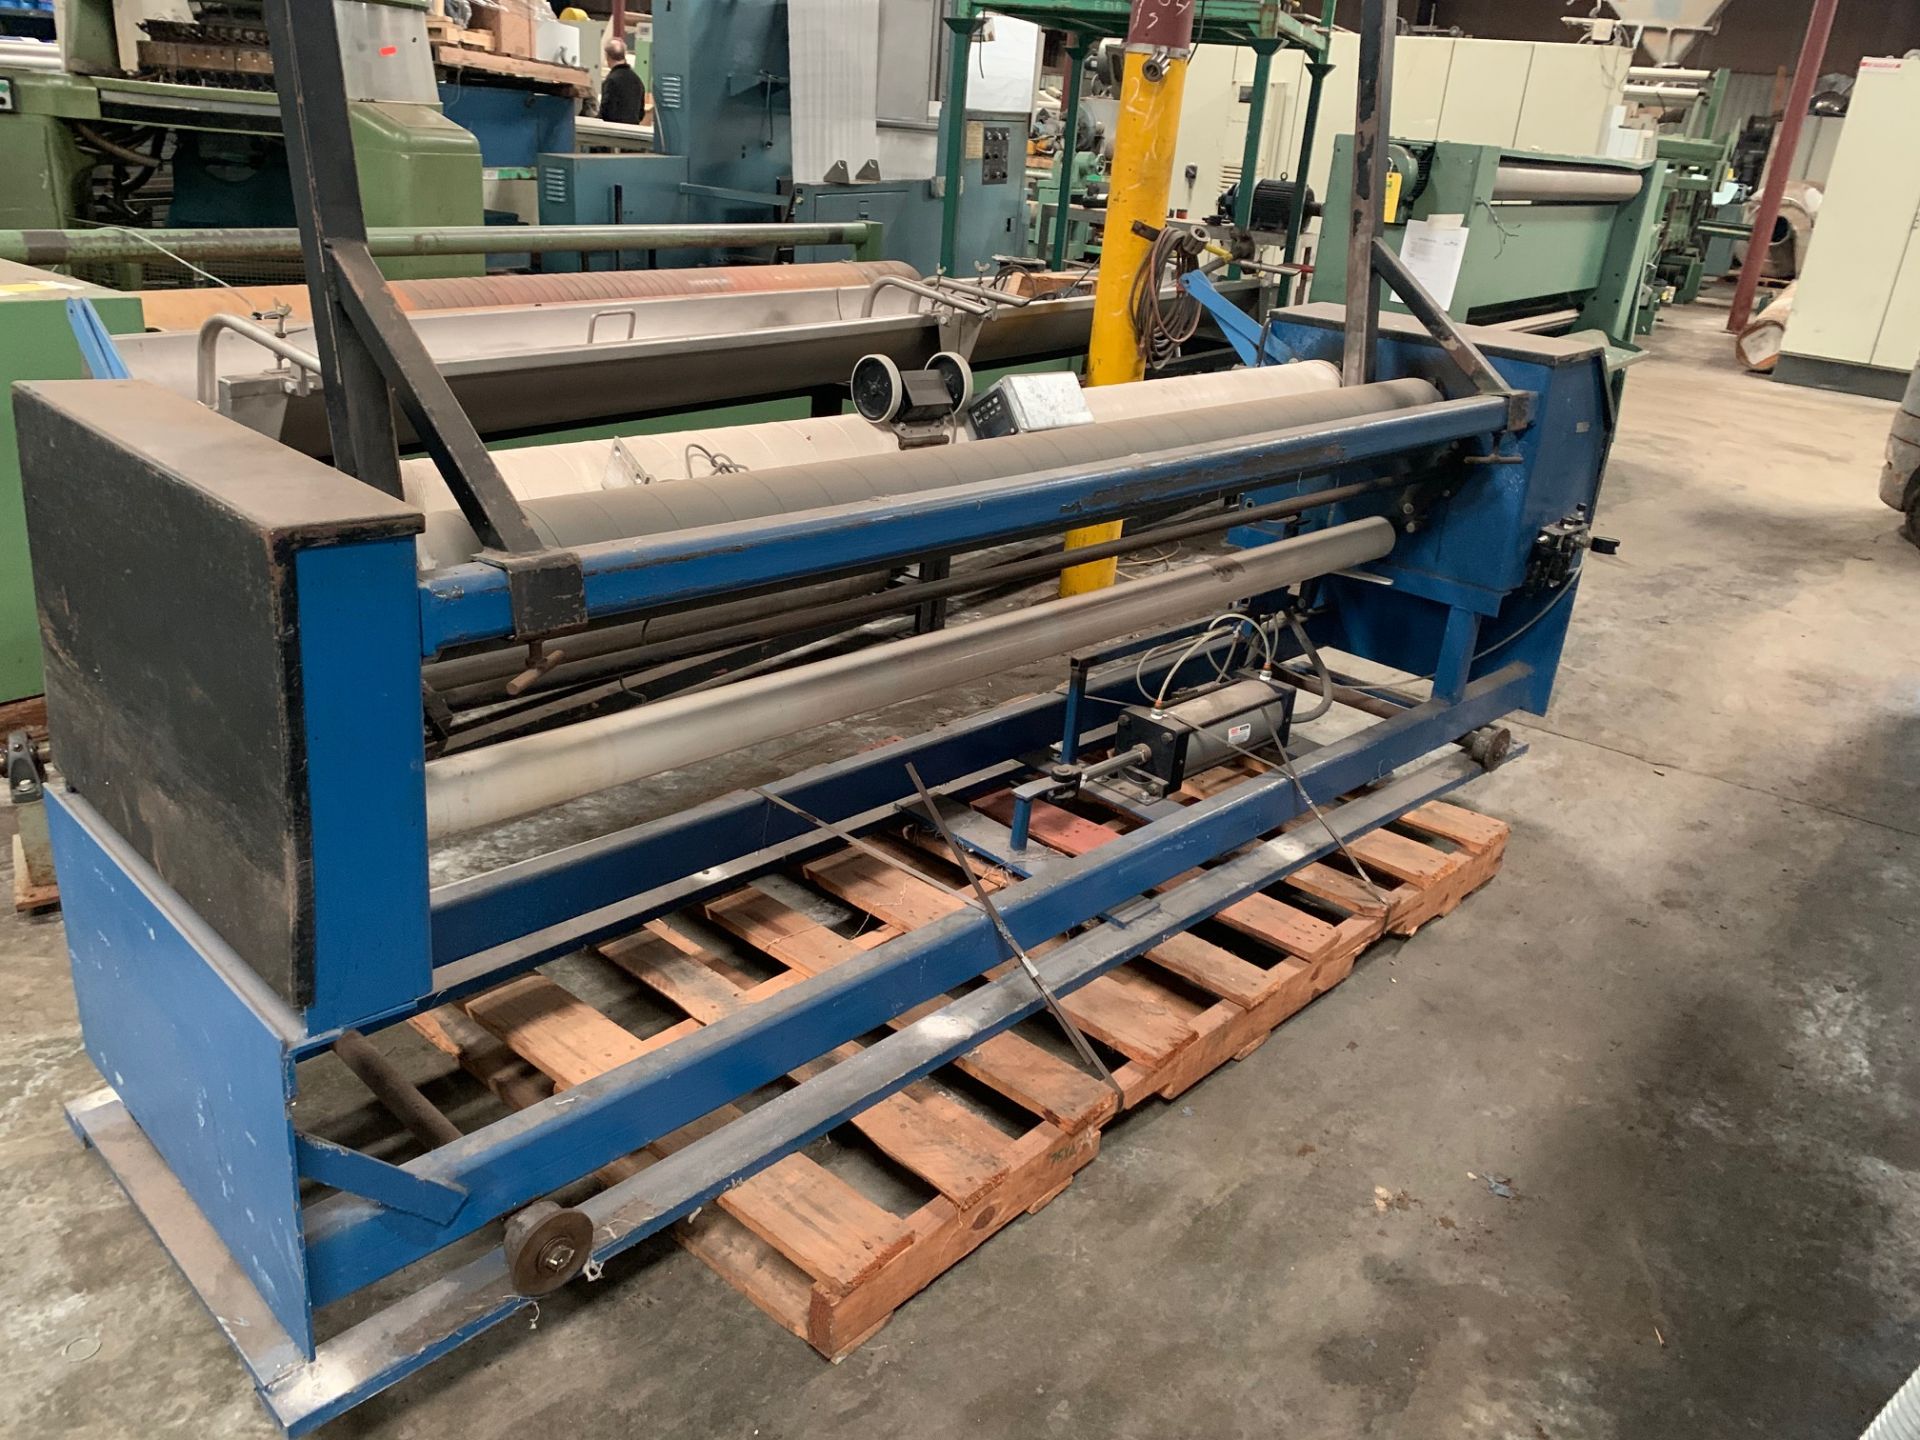 Greenville Machinery Bond Roll Up Machine, Serial# 2379-16, Working Width 86", 208/230V, Rigging Fee